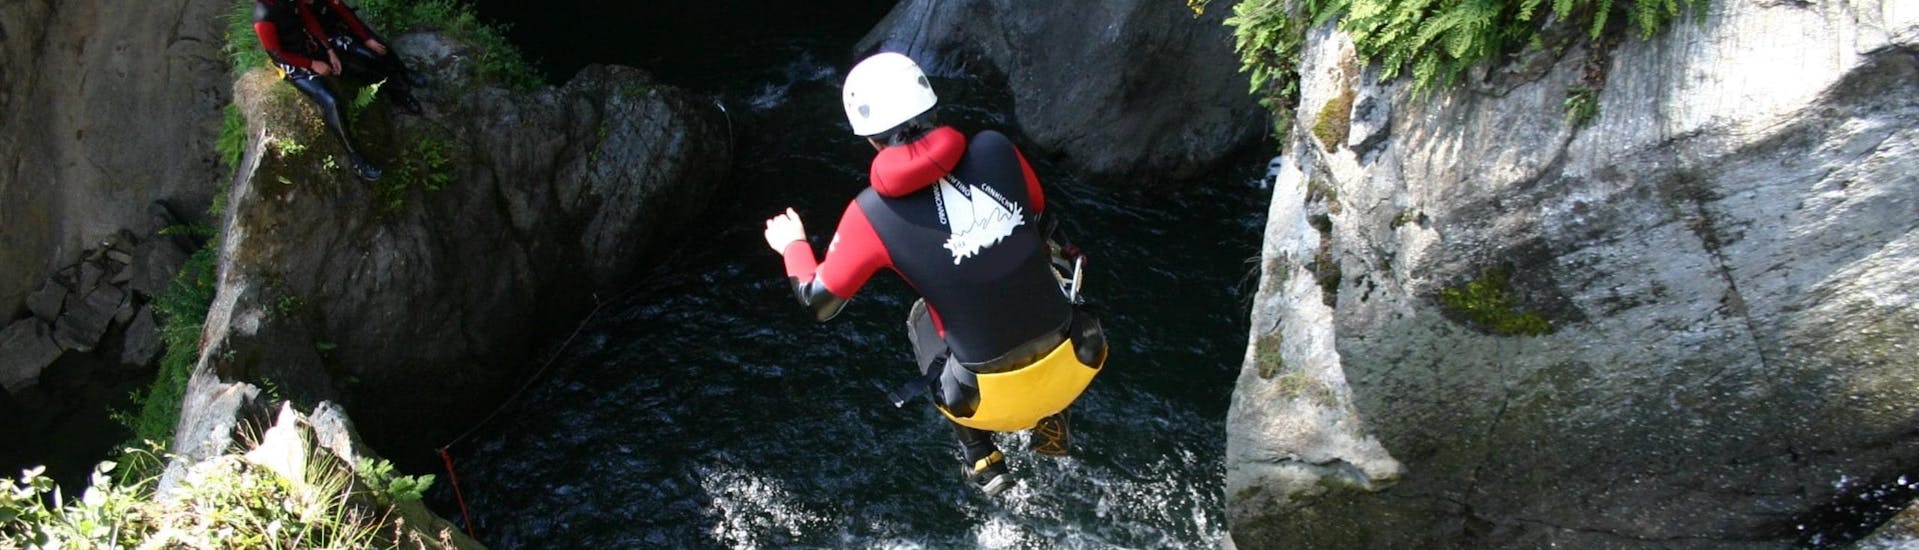 A canyoneer is jumping from a waterfall into a natural pool of water during the tour Canyoning in the Alpenrosenklamm in Ötztal for Beginners with CanKick Ötztal.